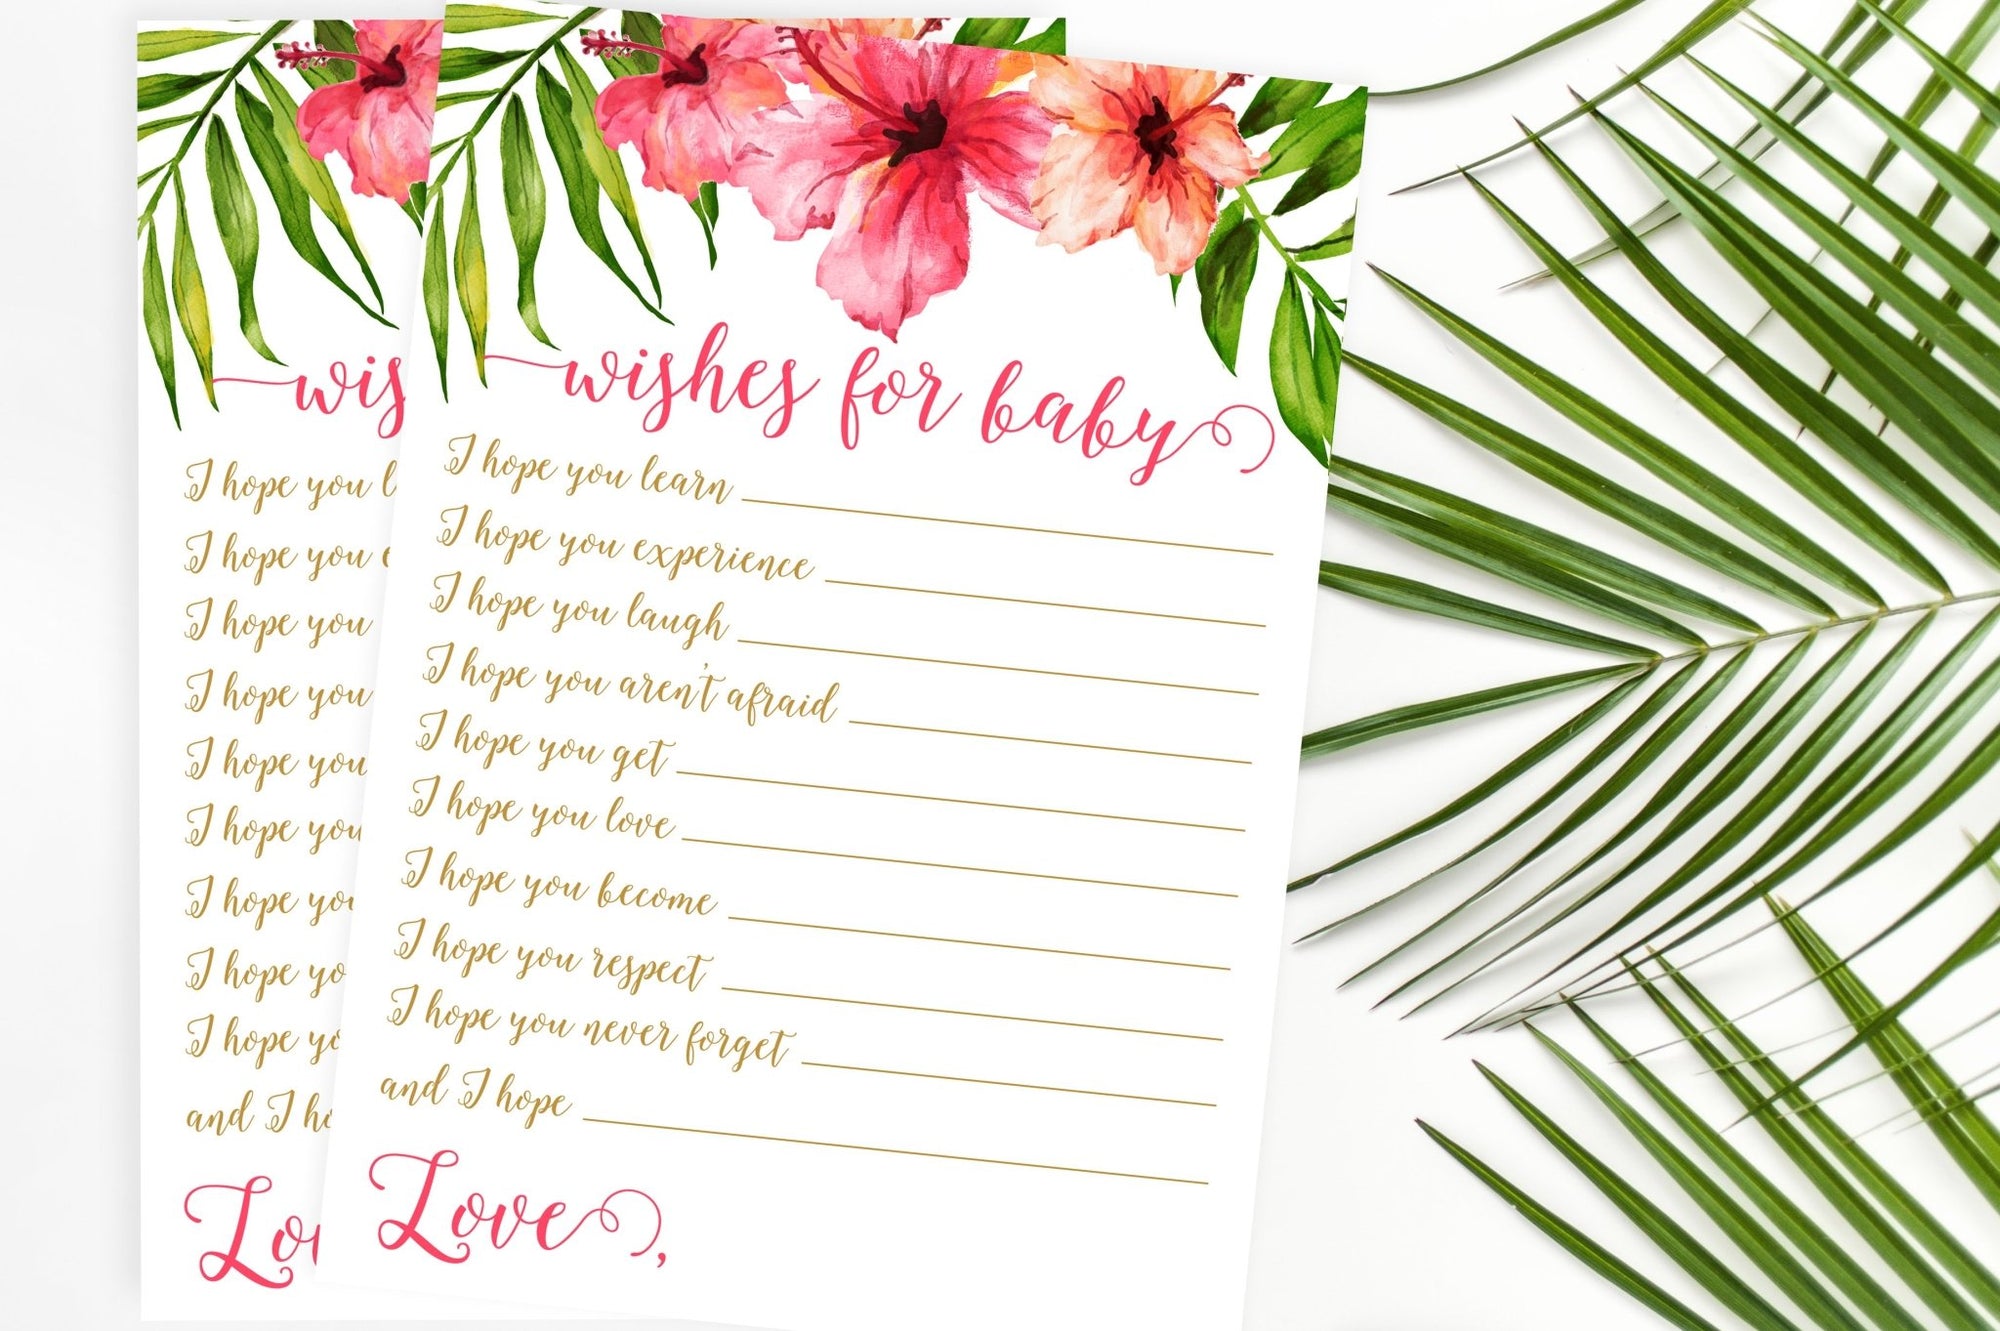 Baby Shower Welcome Sign - Tropical Printable - Pretty Collected